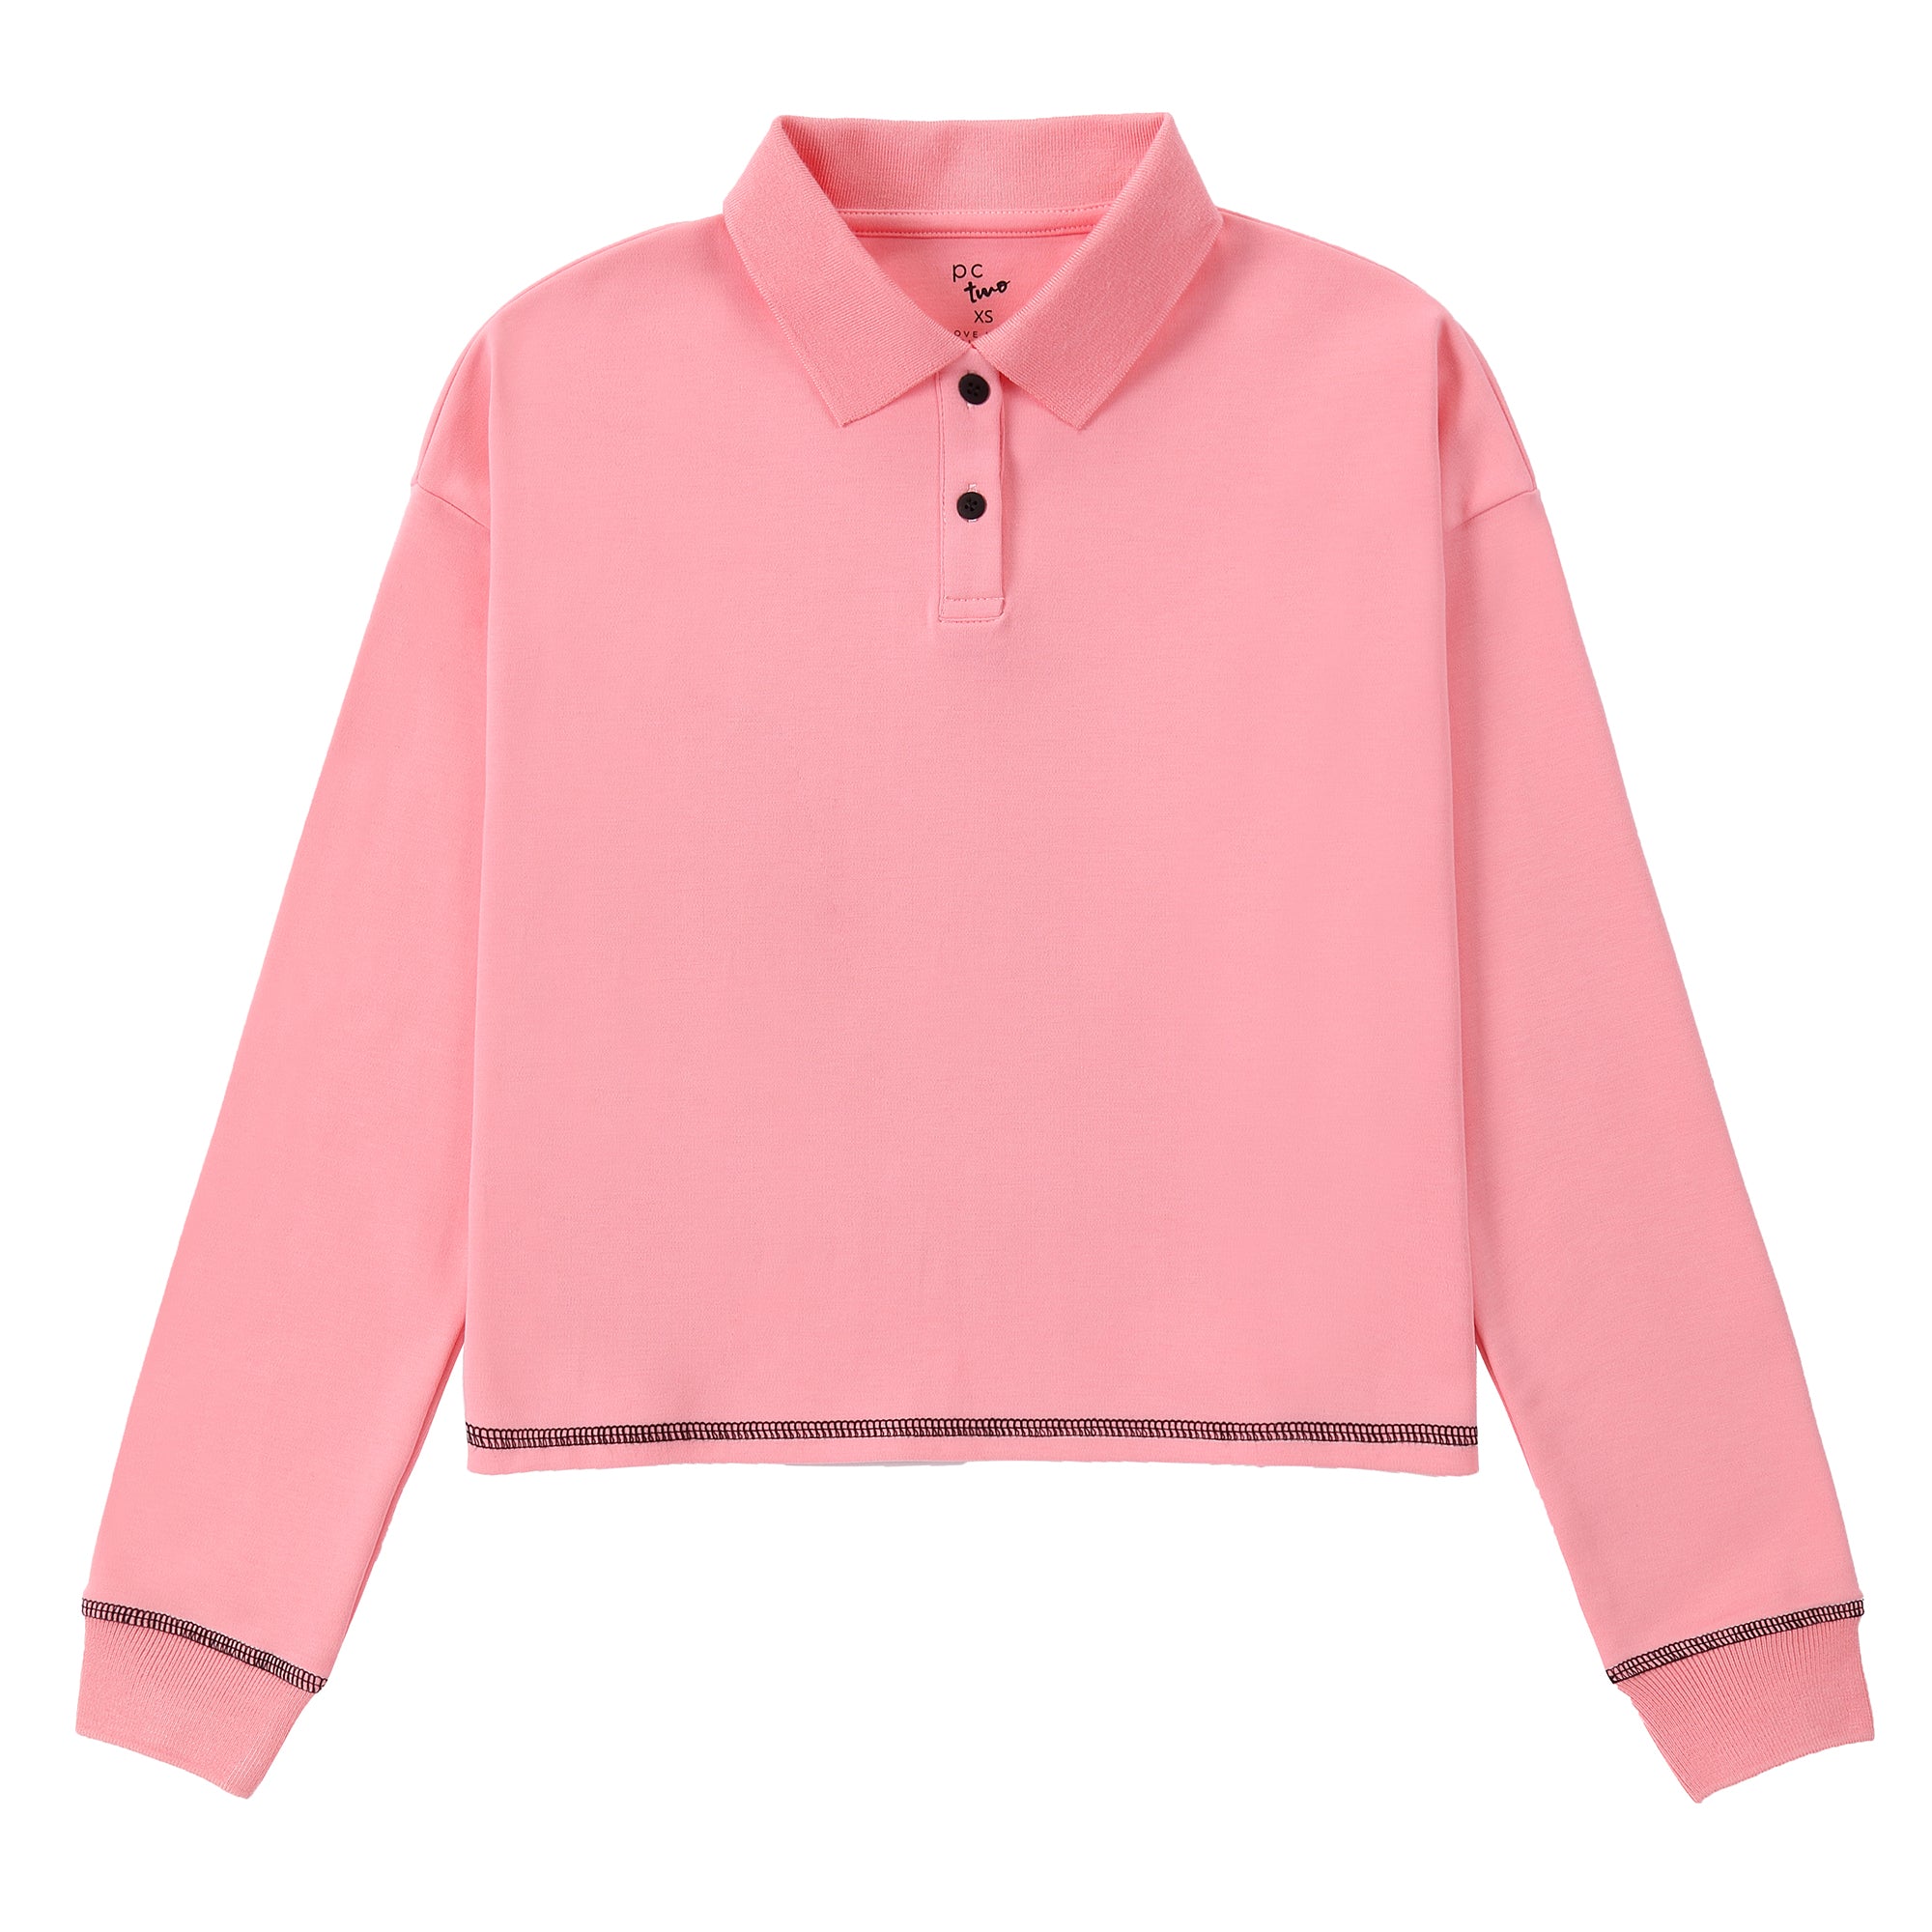 Hot Pink Cropped Polo With Black Accents